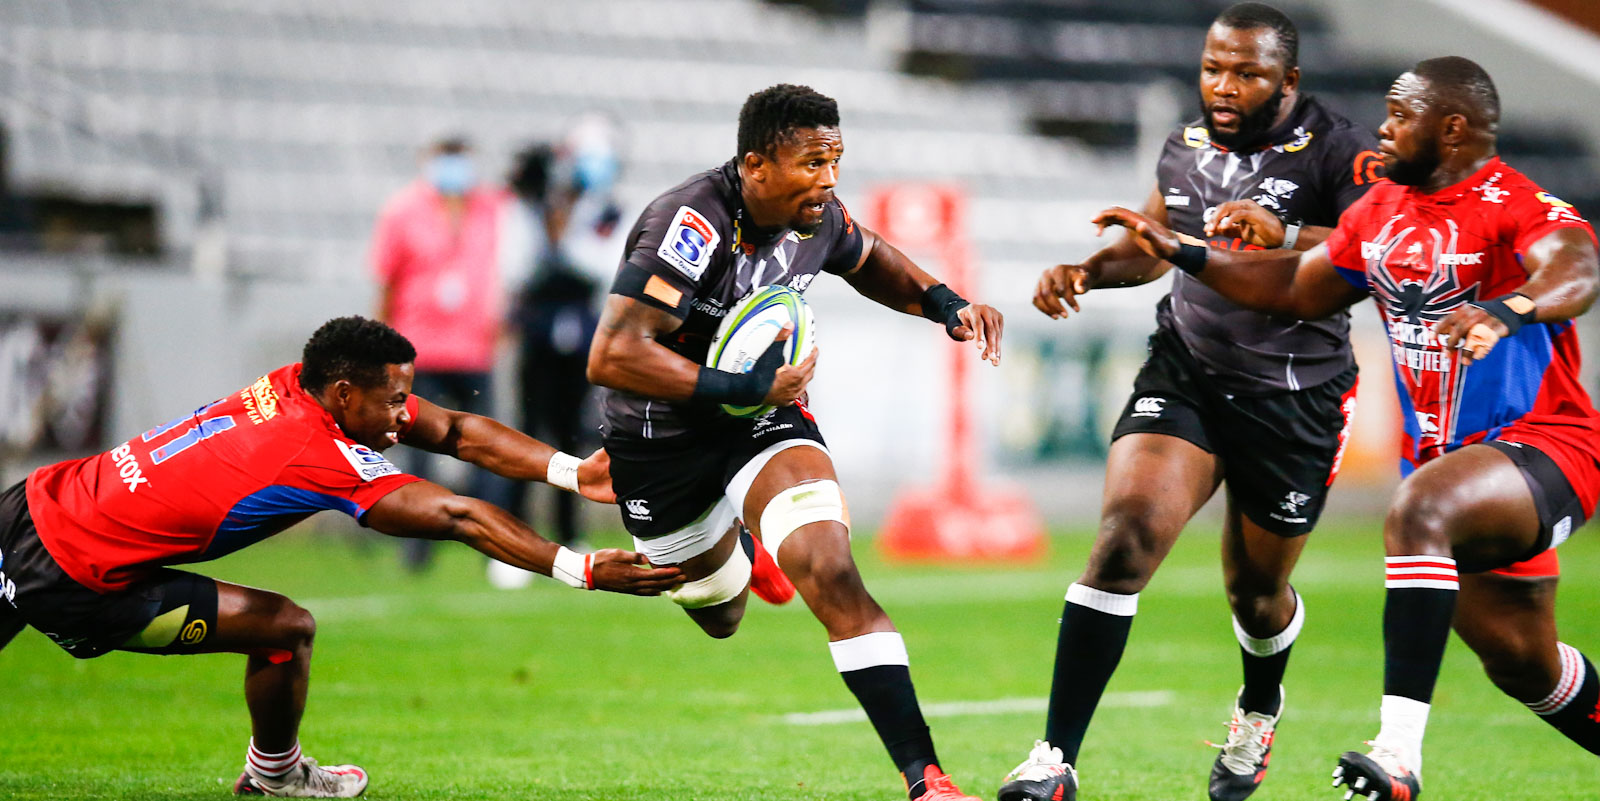 Sikhumbuzo Notshe on the charge for the Cell C Sharks